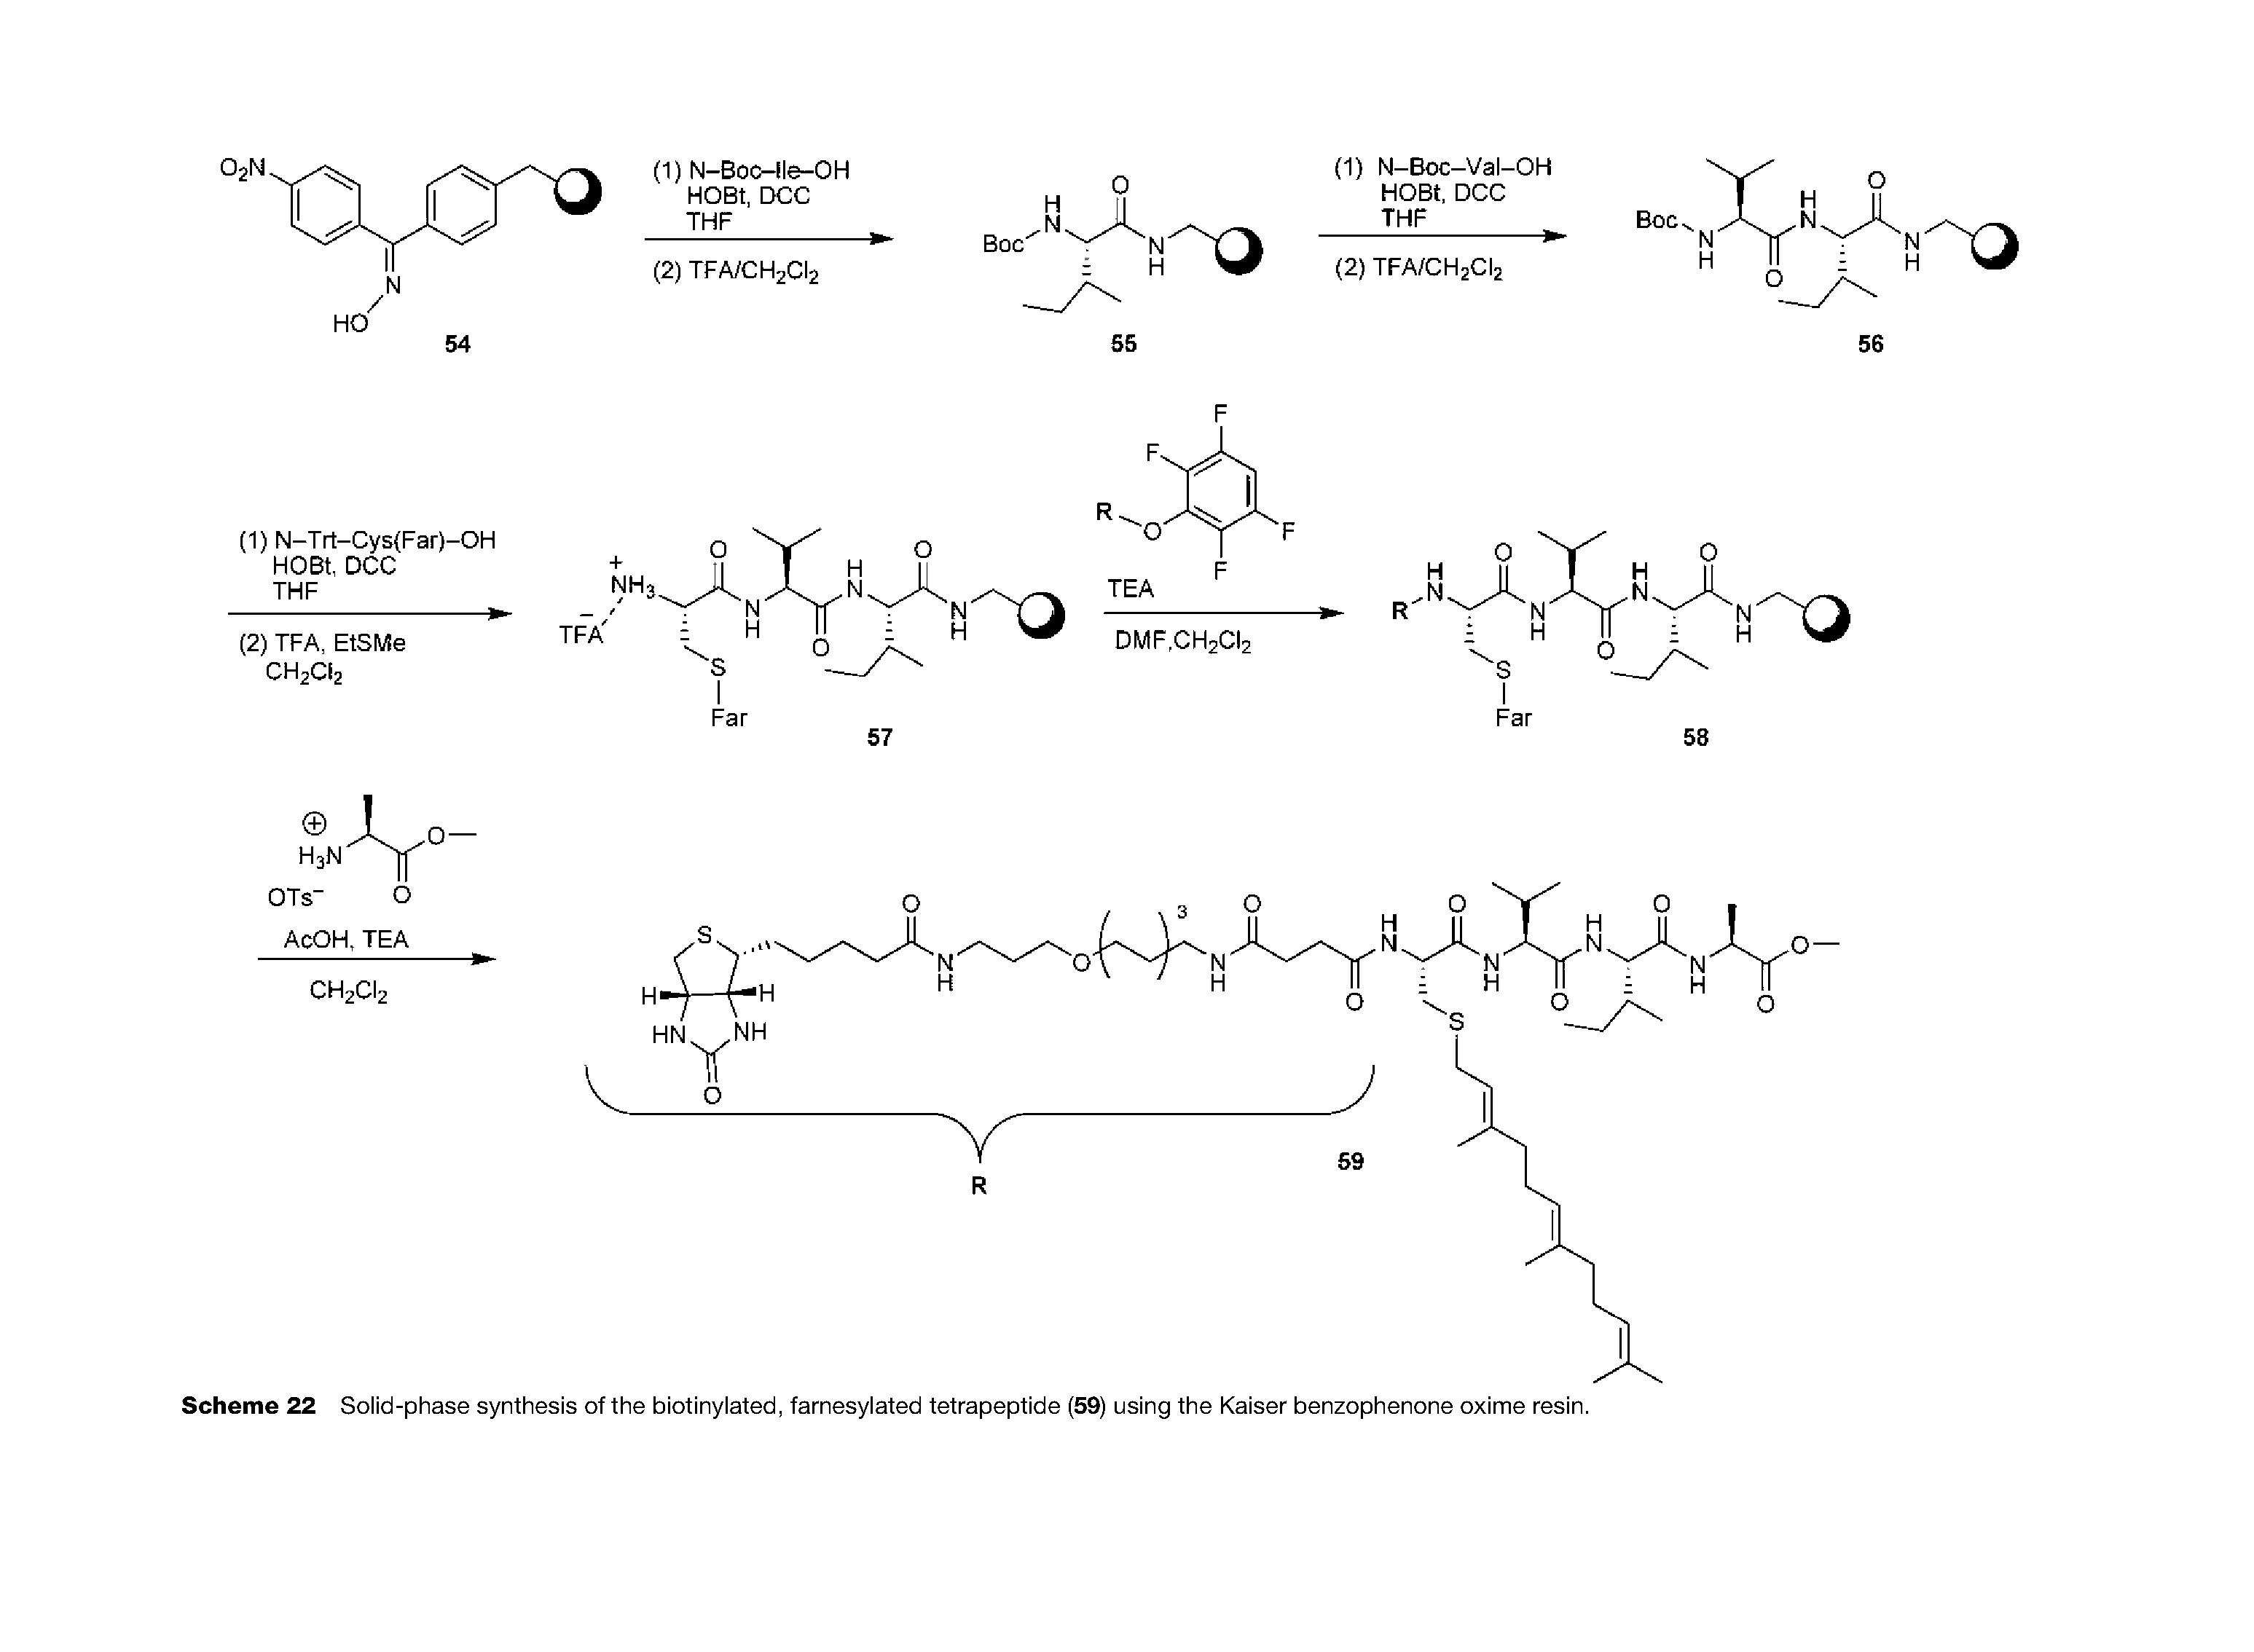 Scheme 22 Solid-phase synthesis of the biotinylated, farnesylated tetrapeptide (59) using the Kaiser benzophenone oxime resin.